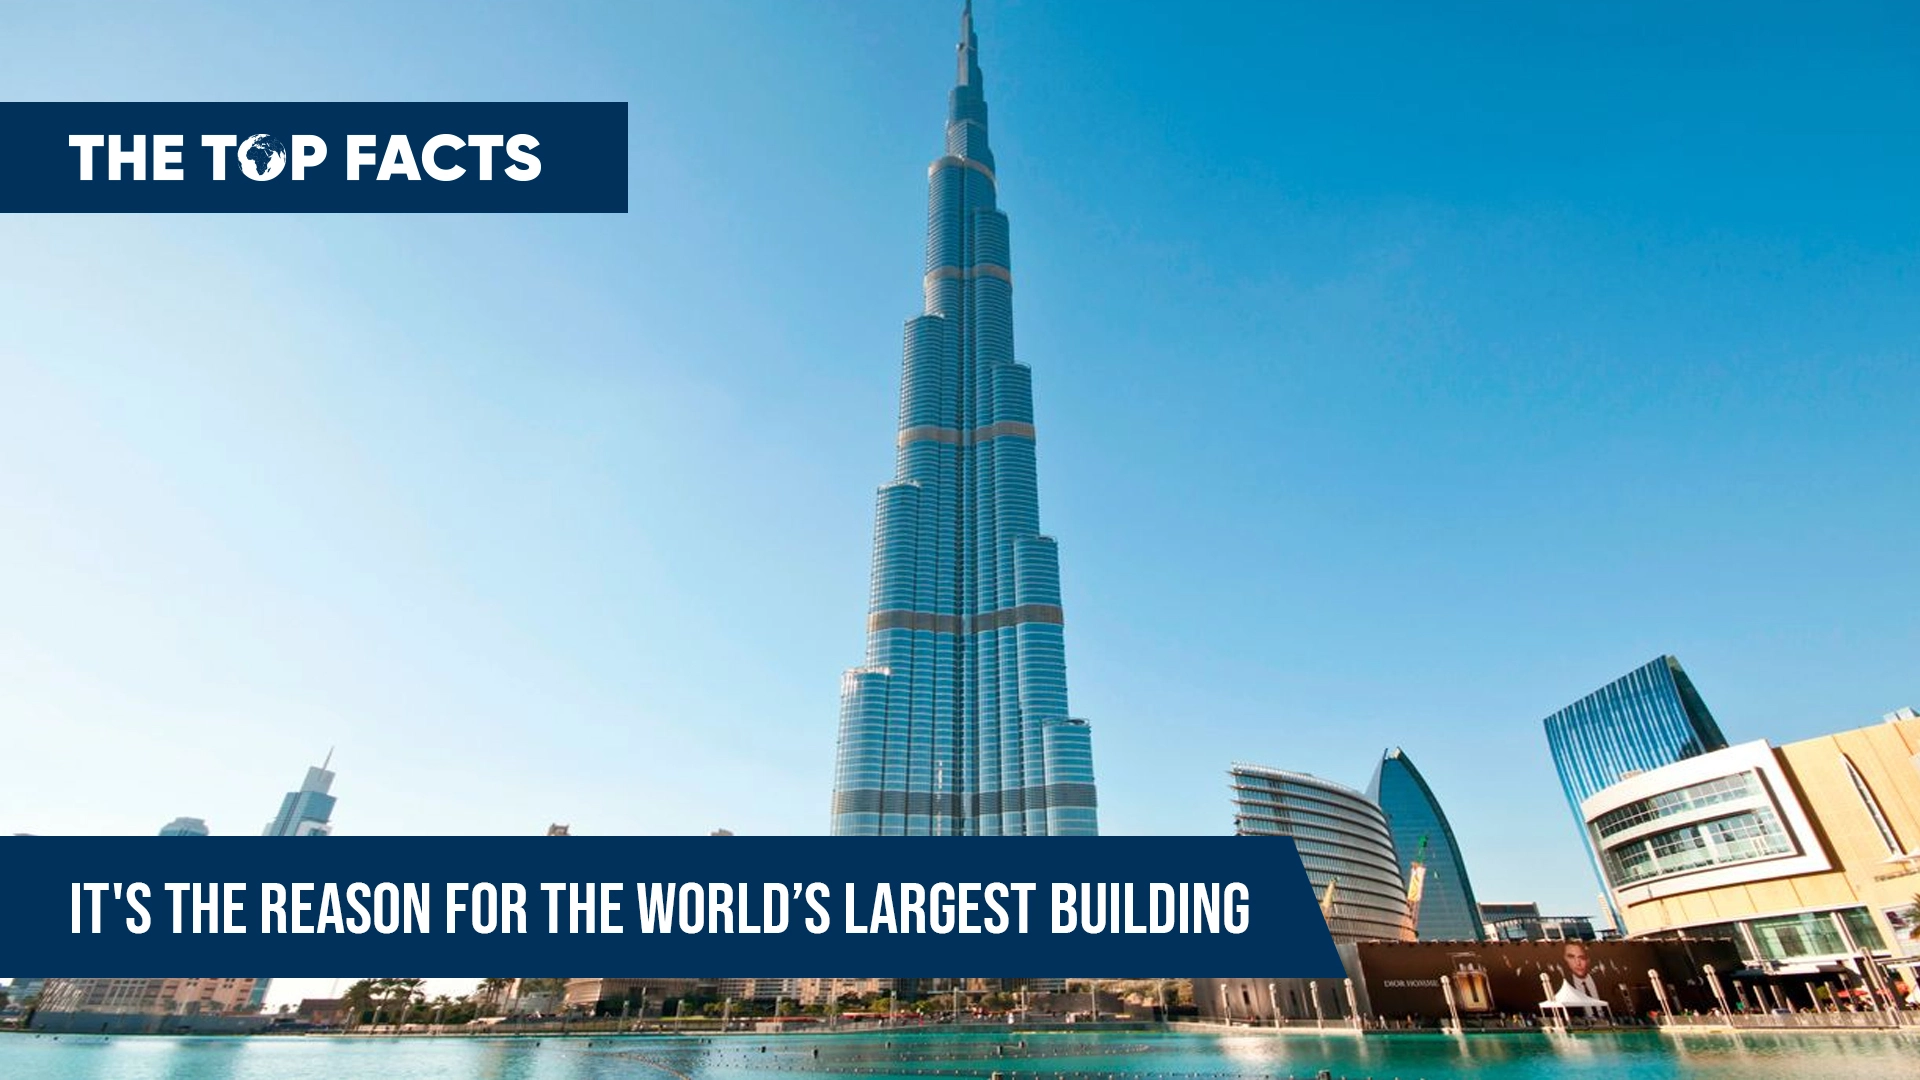 The plane is the reason for the existence of the world's largest building by volume.